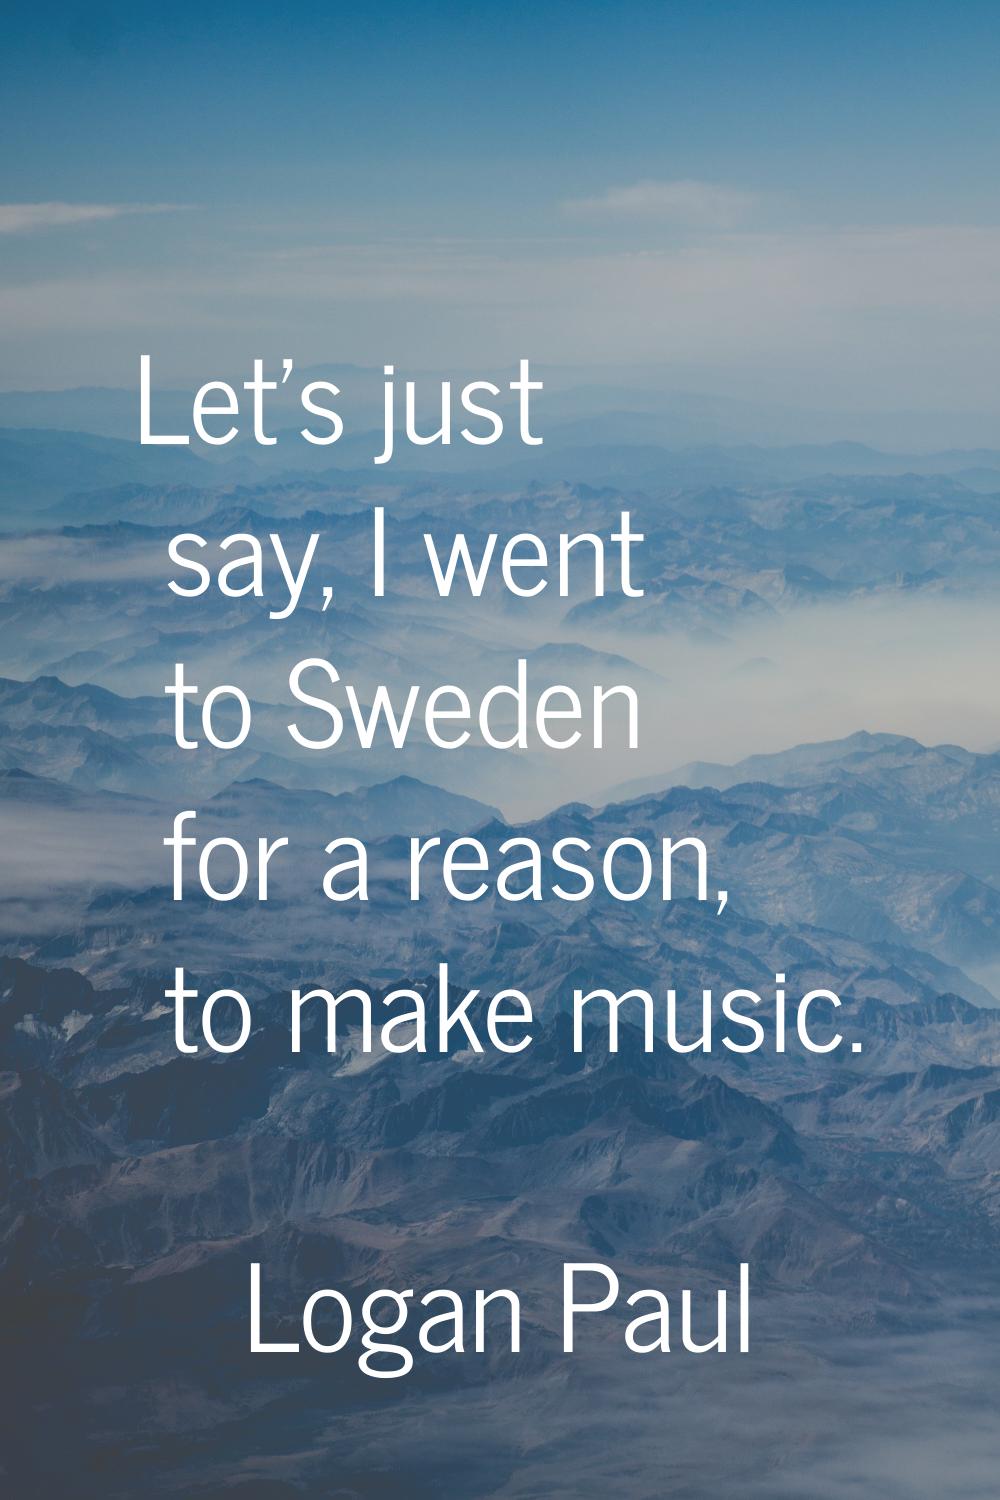 Let's just say, I went to Sweden for a reason, to make music.